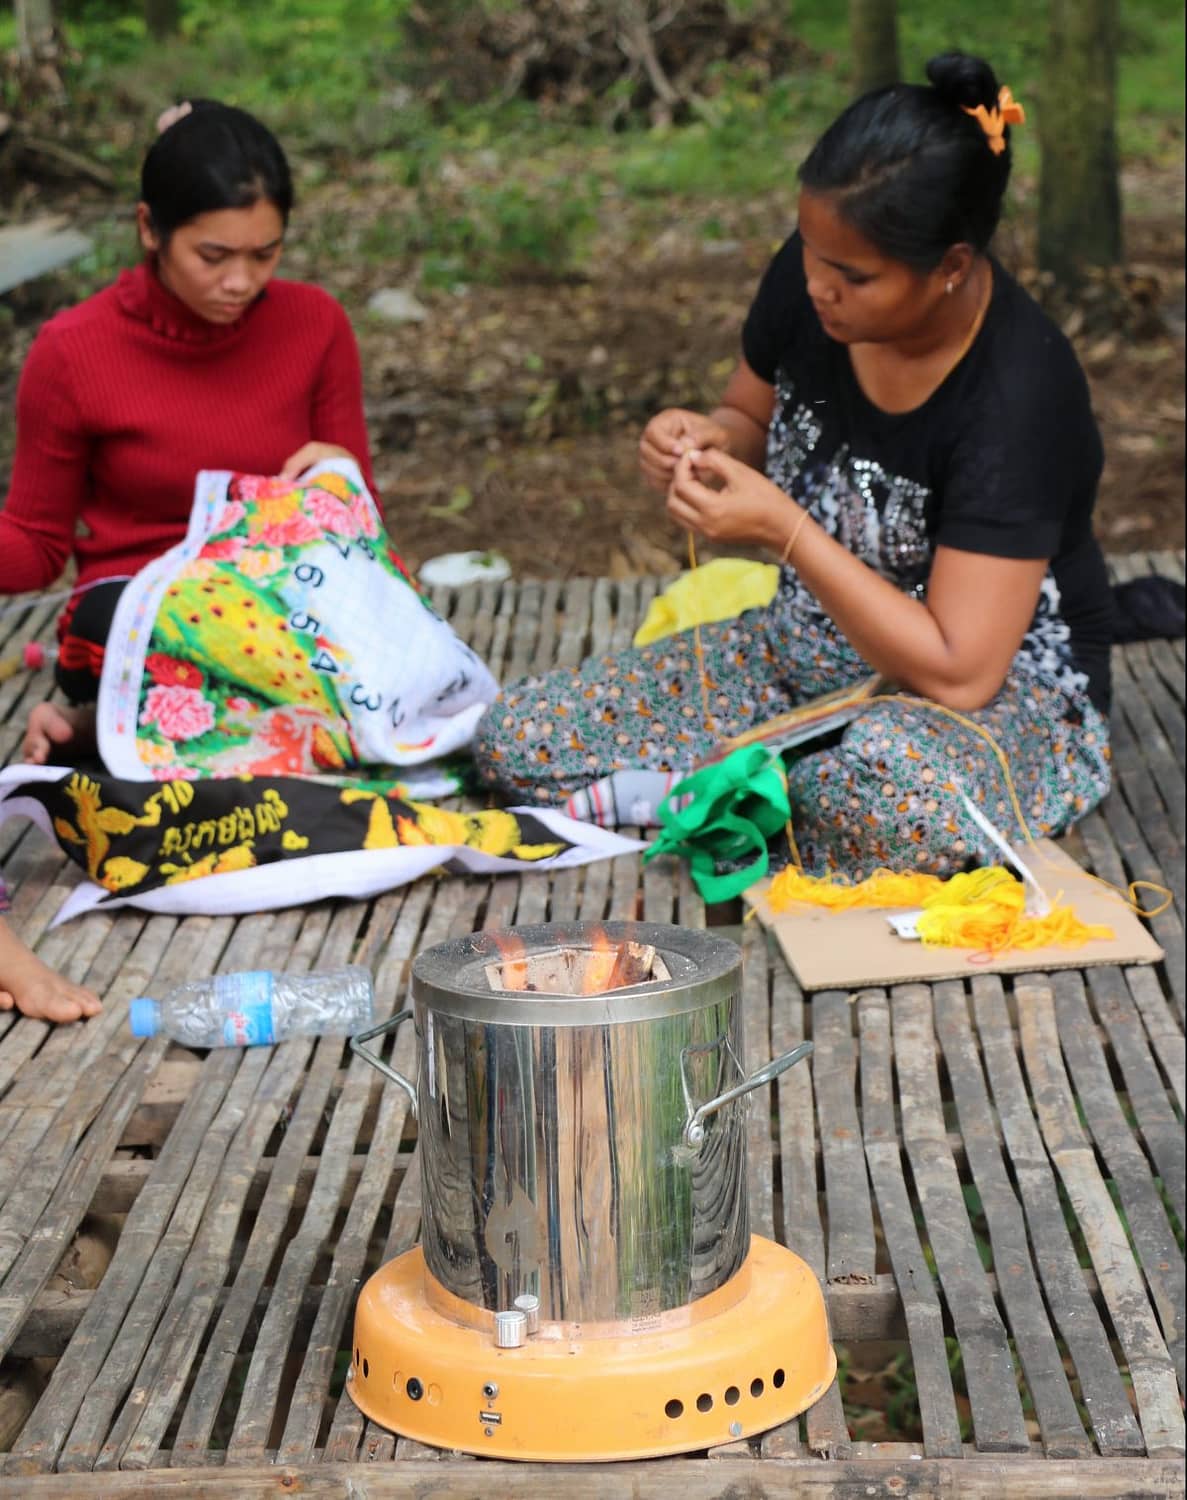 Local women with the ACE cookstove.